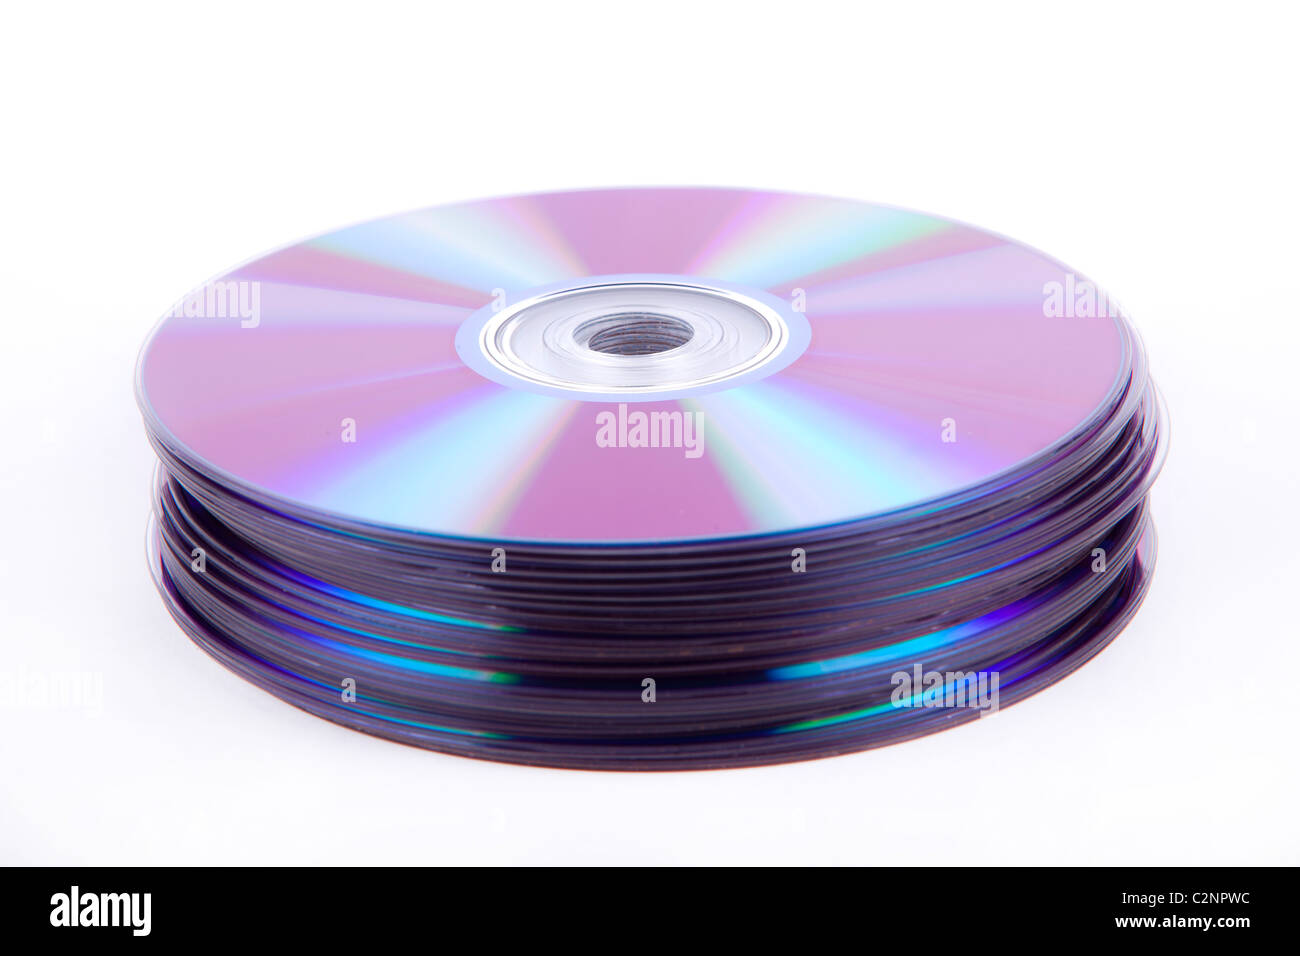 DVD/CD pile, stack on white background Stock Photo